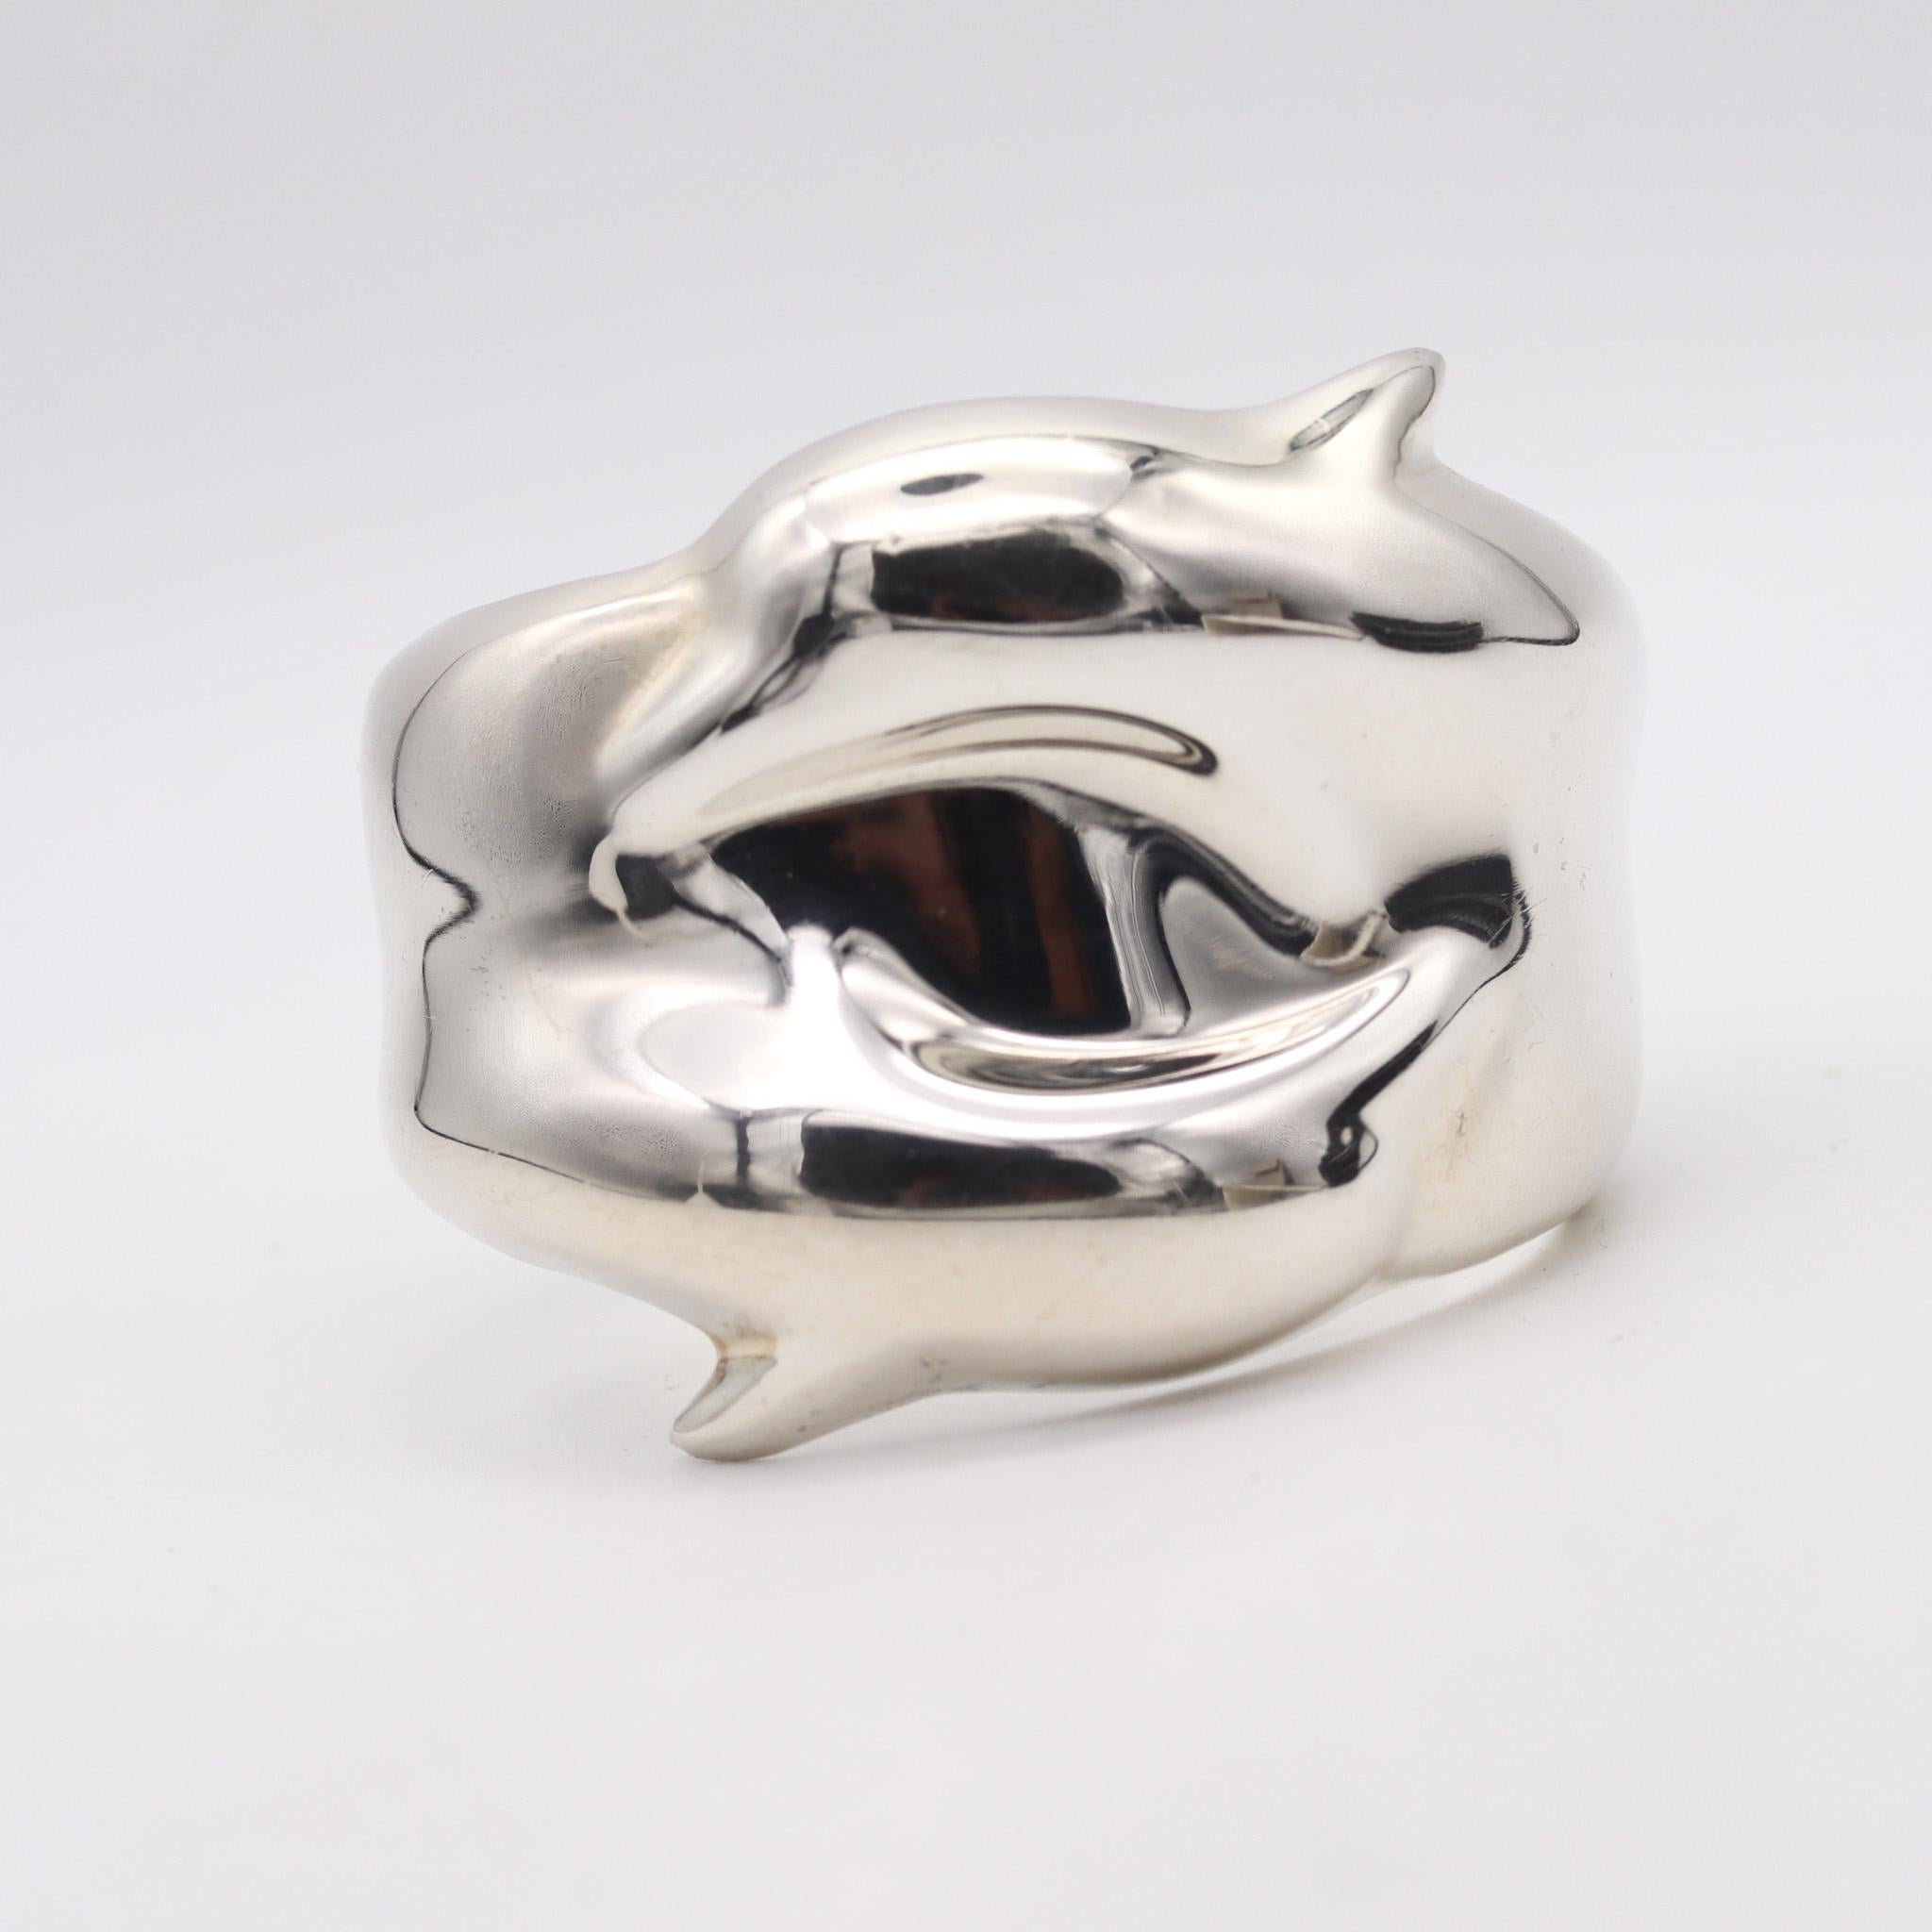 Pisces Zodiacal Cuff designed by Elsa Peretti (1940-2021) for Tiffany & Co.

Very rare sculptural zodiacal cuff for Pisces, created by Elsa Peretti for the Tiffany studios back in the 1982. This model was first created in the 1976-77 and was